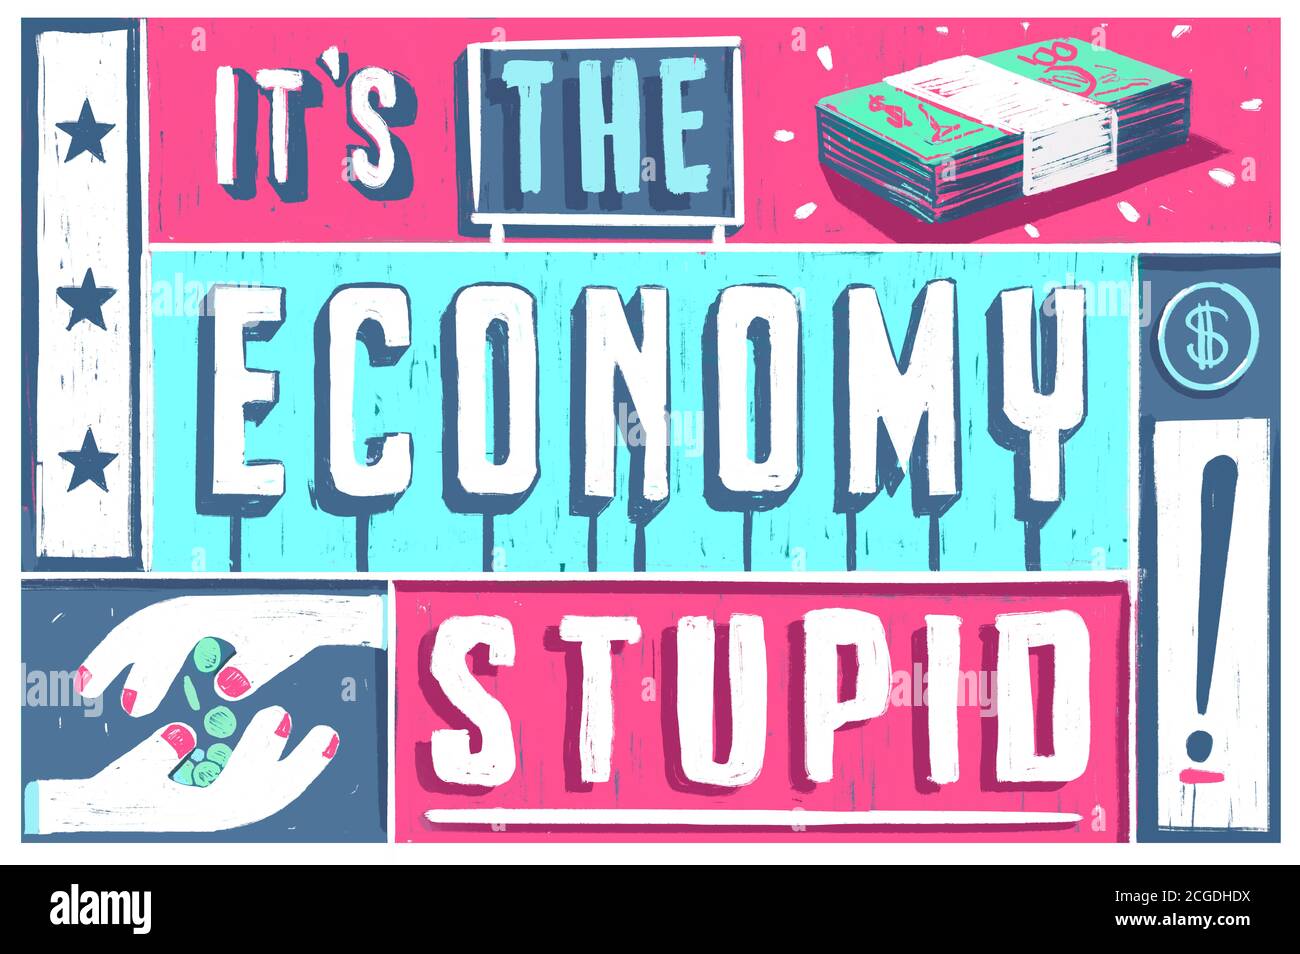 It's the economy stupid illustration. A common saying when asked what matters to voters the most in elections. Stock Photo